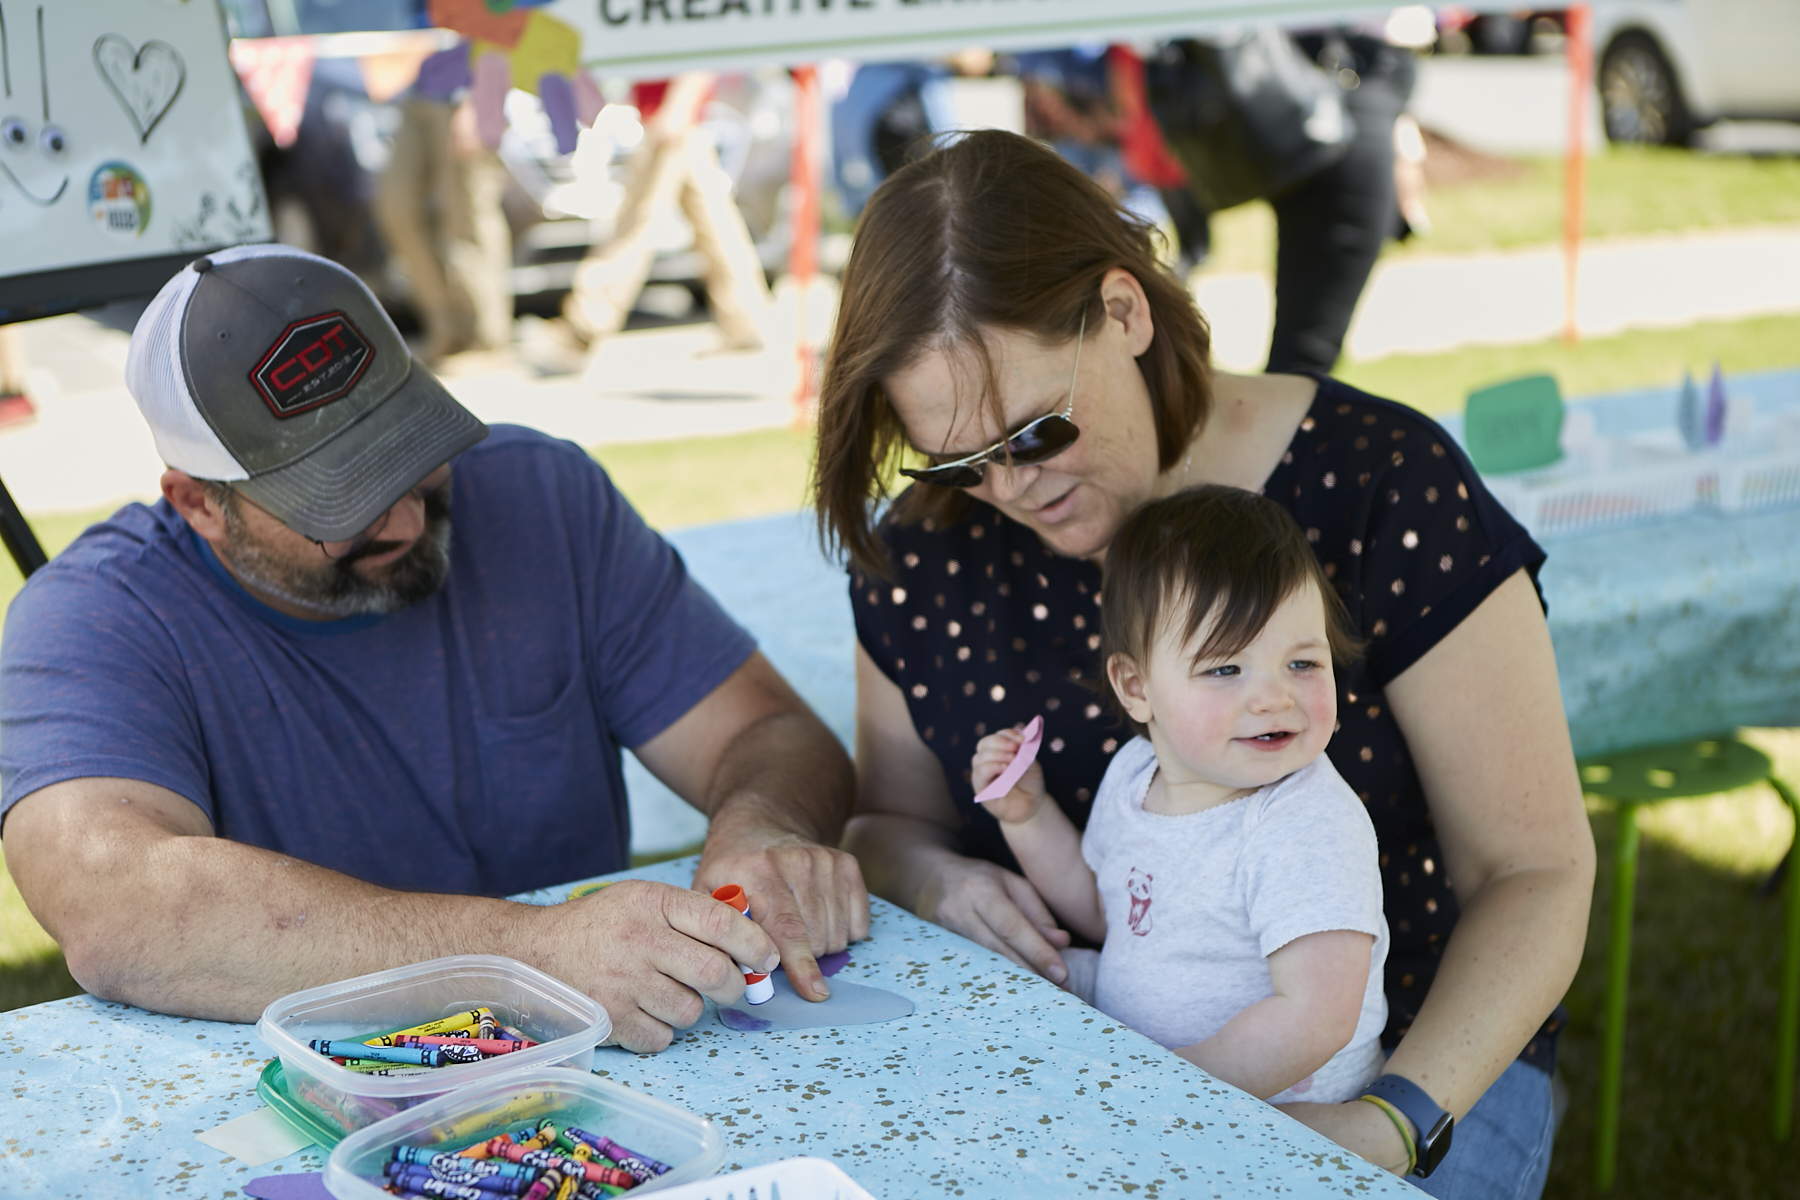 Photo of man in baseball cap holding a glue stick, a woman wearing sunglasses, holding a toddler and doing a craft